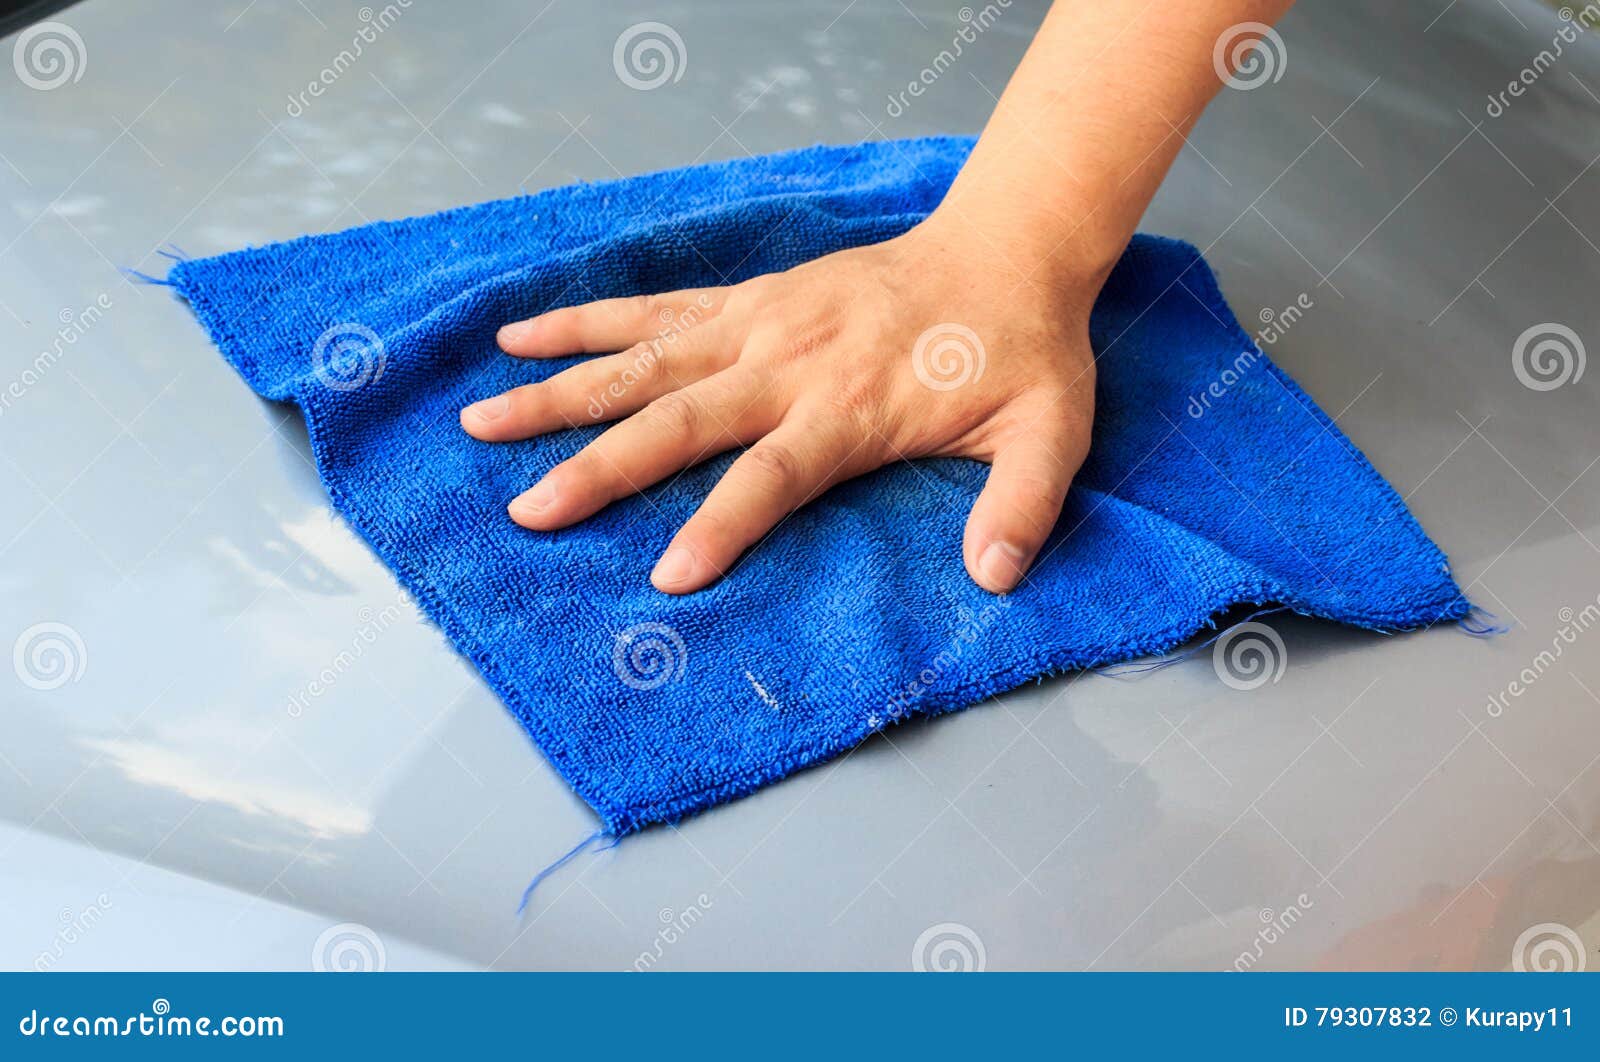 waterless car wash. men`s hand with blue cloth cleaning car